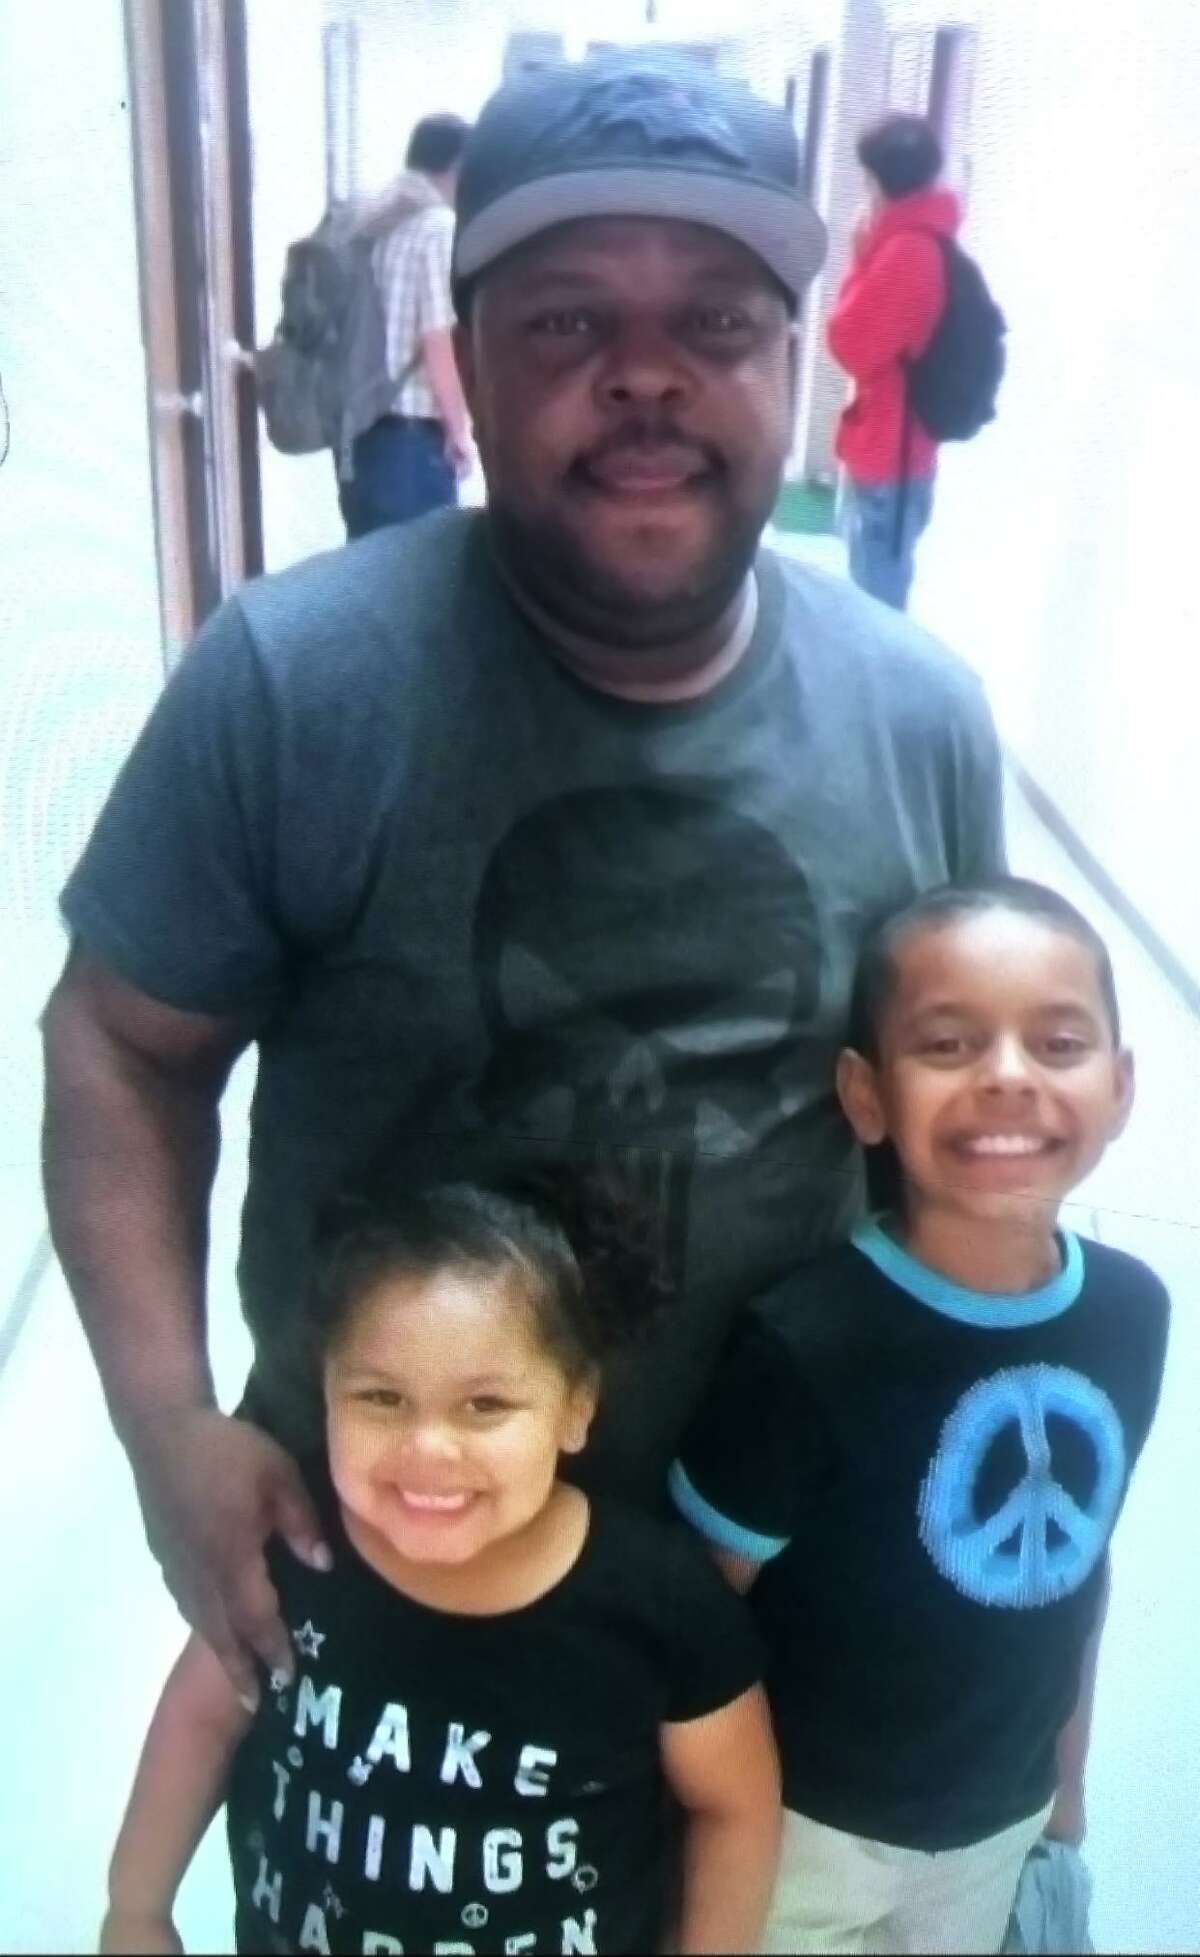 Glen Alan Shorey, who died at age 37 in 2018, is survived by son Magik and daughter Maeaja.